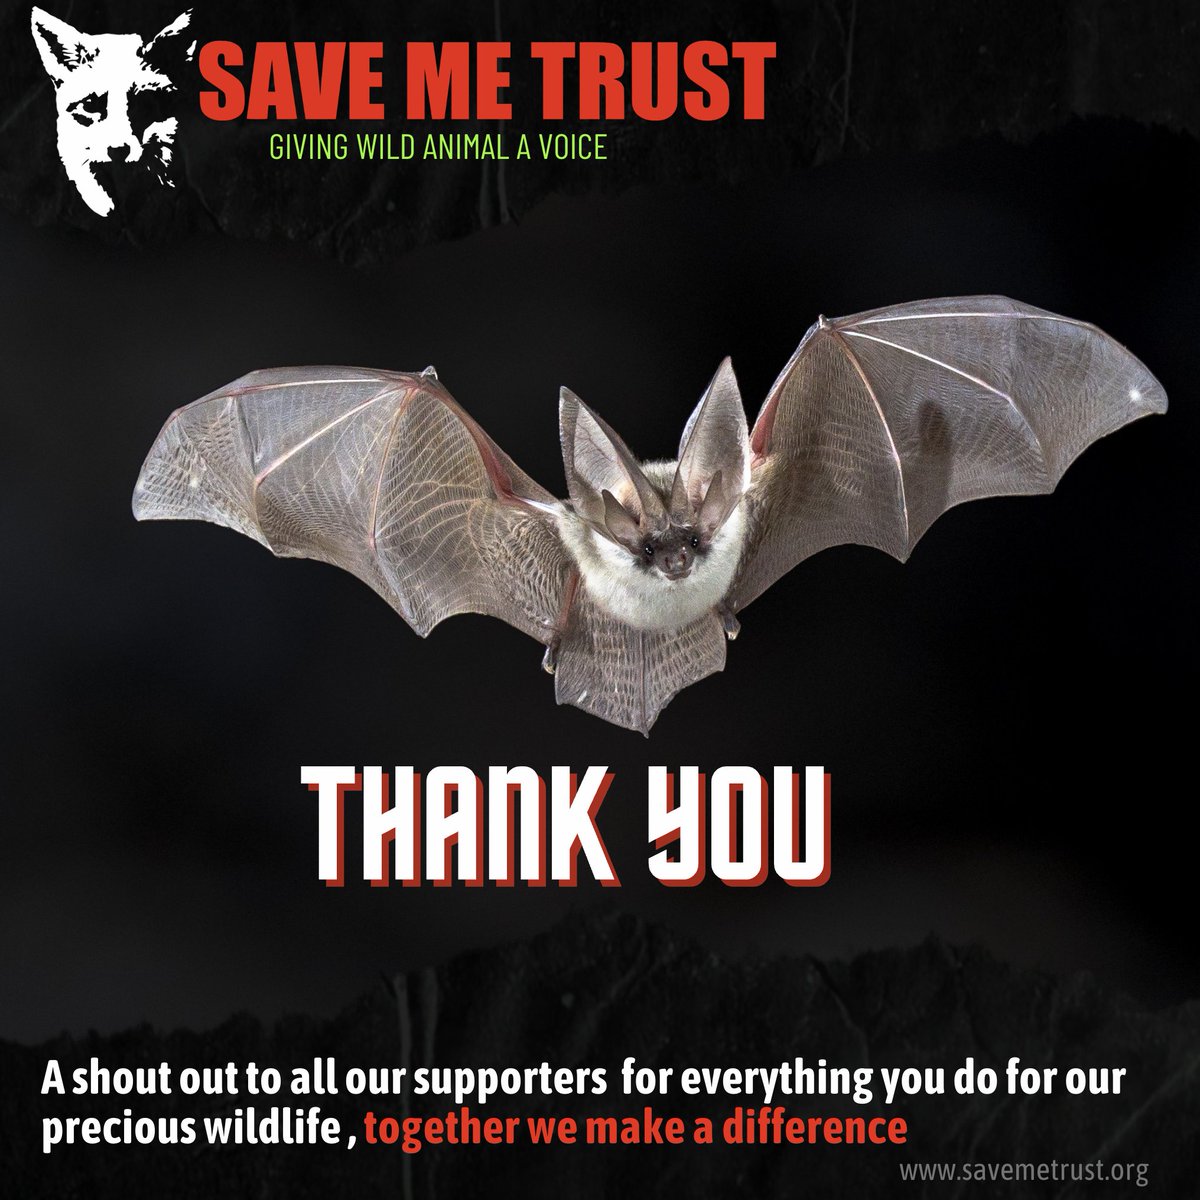 Shout out to all our supporters. Thank you for sharing our petitions. the more people that follow us the louder our voice. Thank you for all your support for everyone here at the trust.